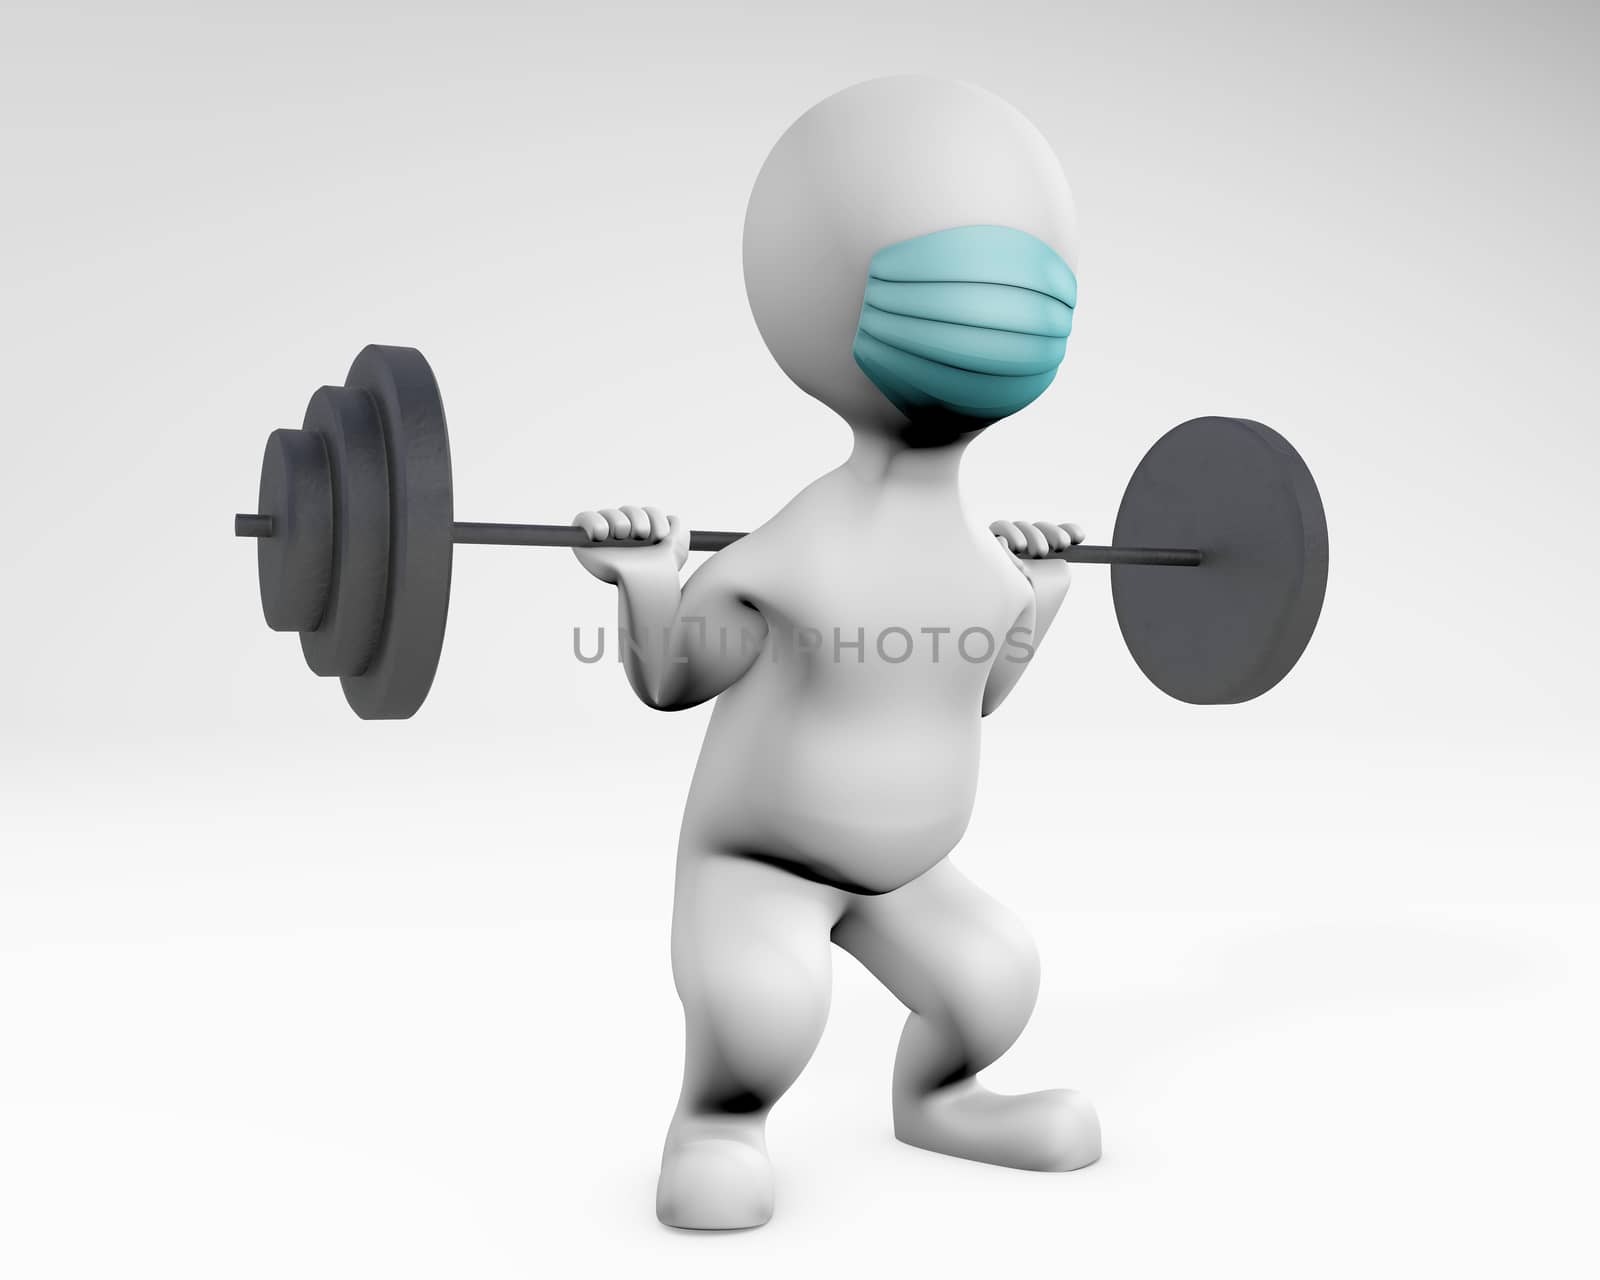 Fatty man with a mask training weight lifting 3d rendering by F1b0nacci